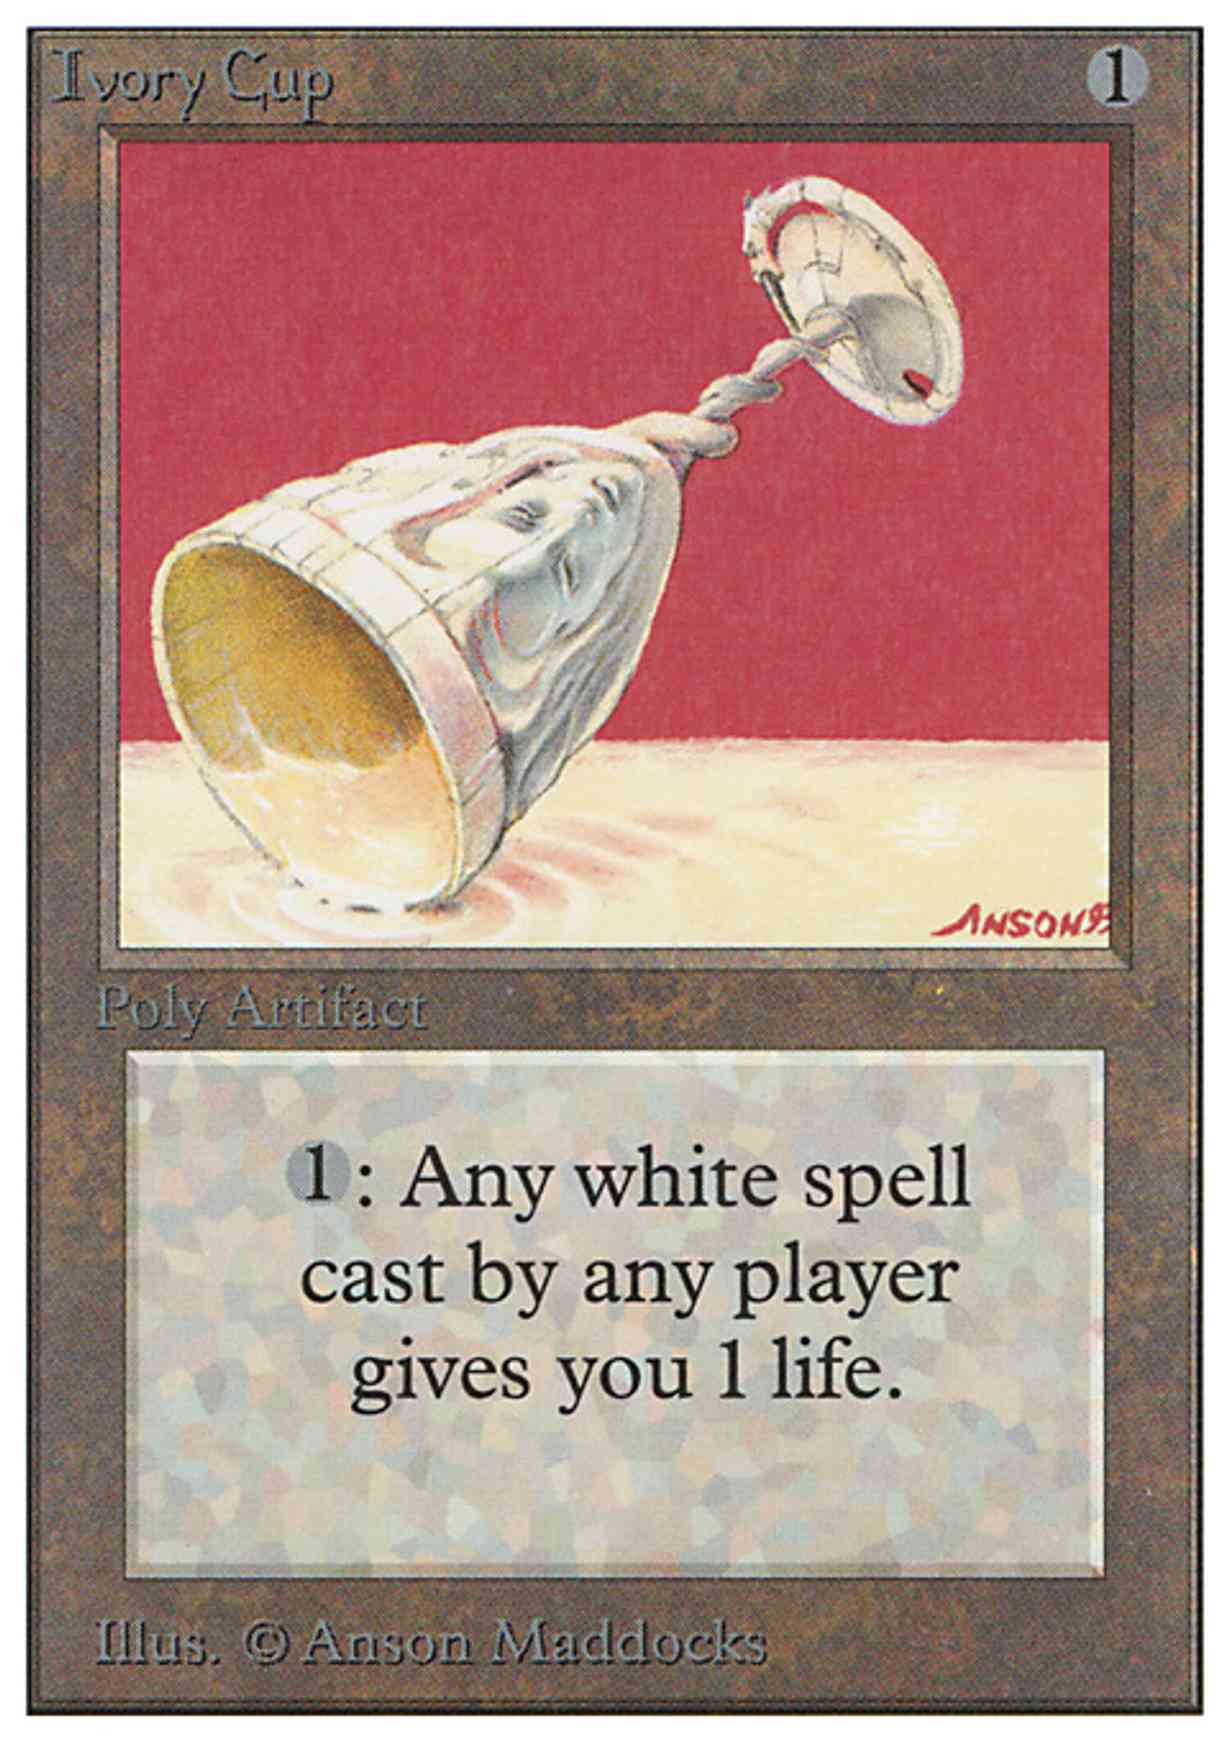 Ivory Cup magic card front